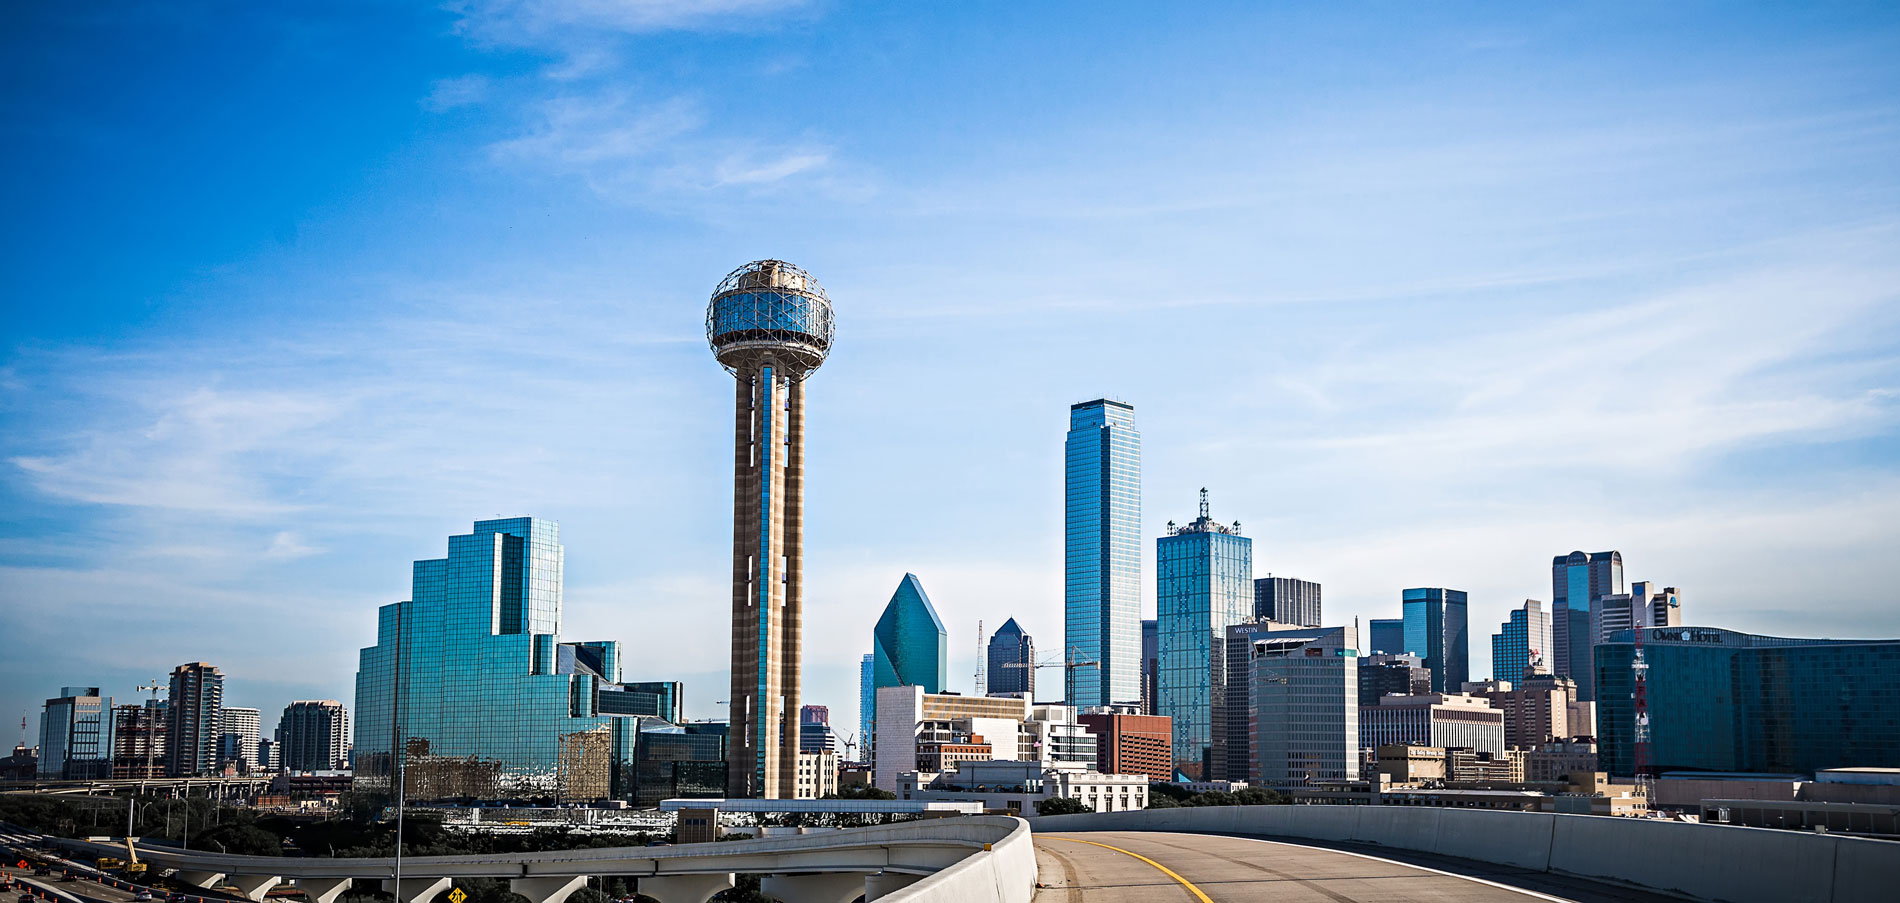 Origins is proud to bring clinical services to Dallas, Texas